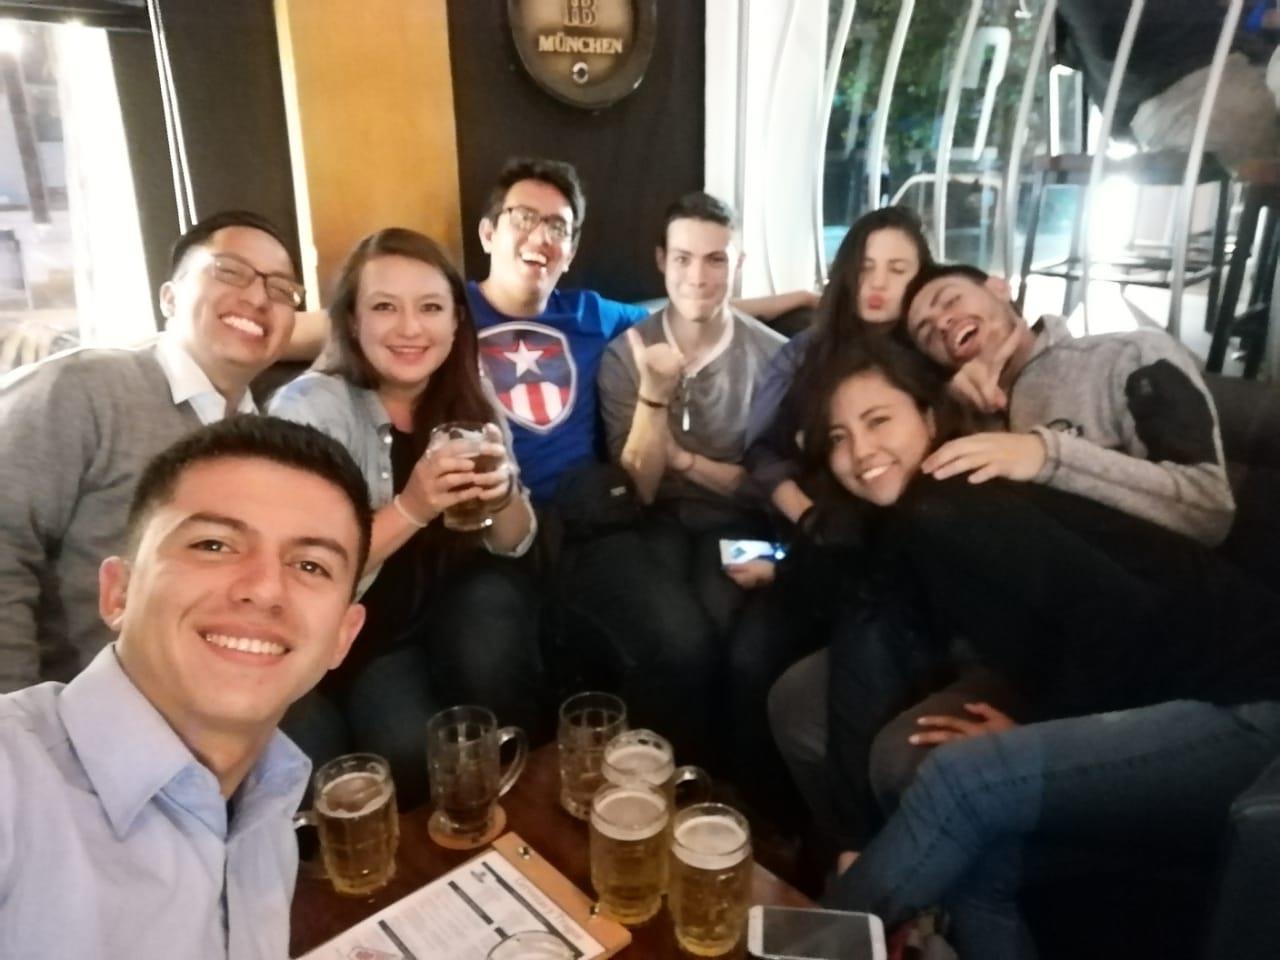 Quito Beer Tour